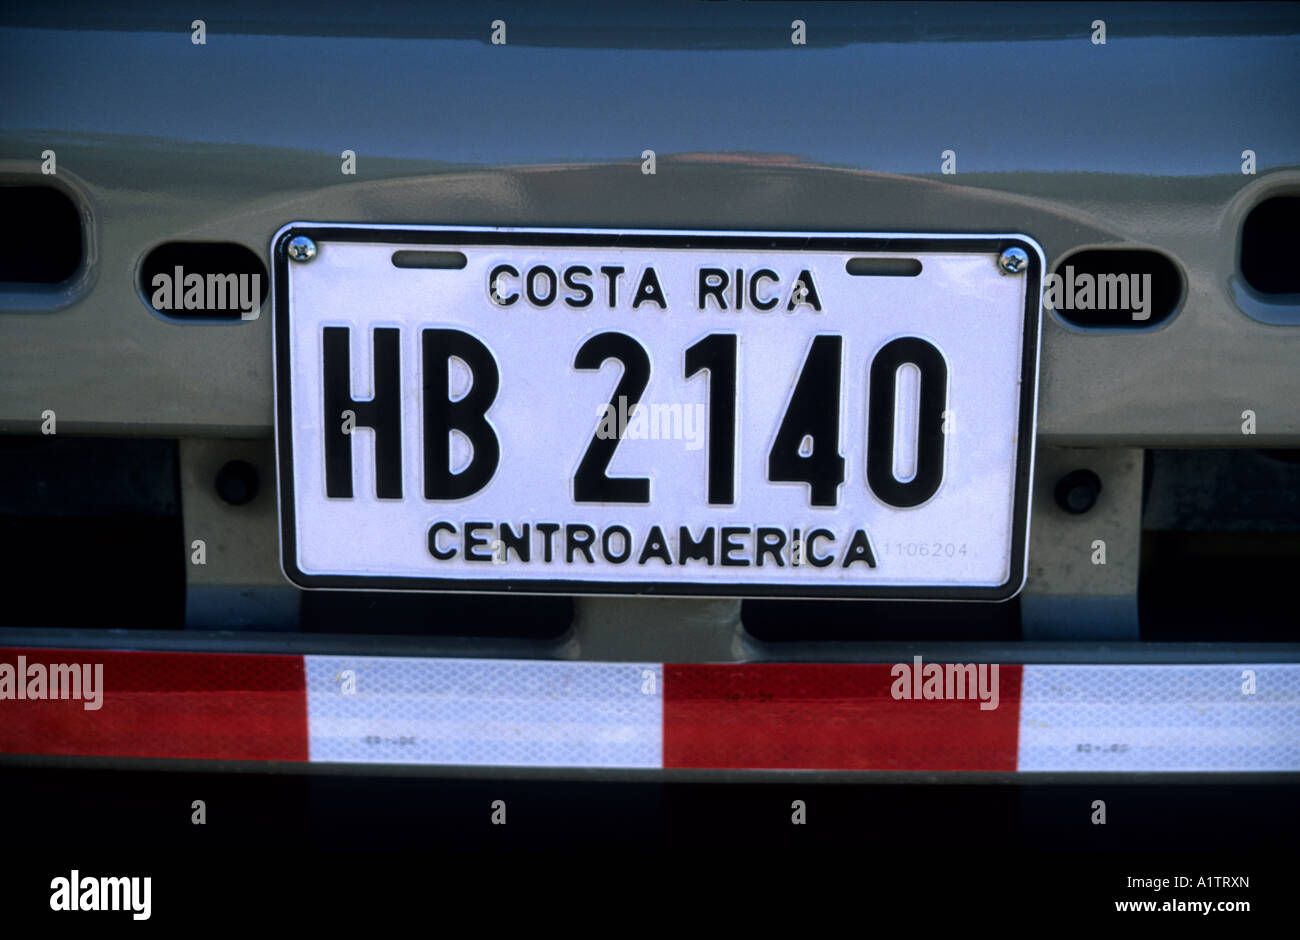 Costa Rica Number Plate Stock Photo